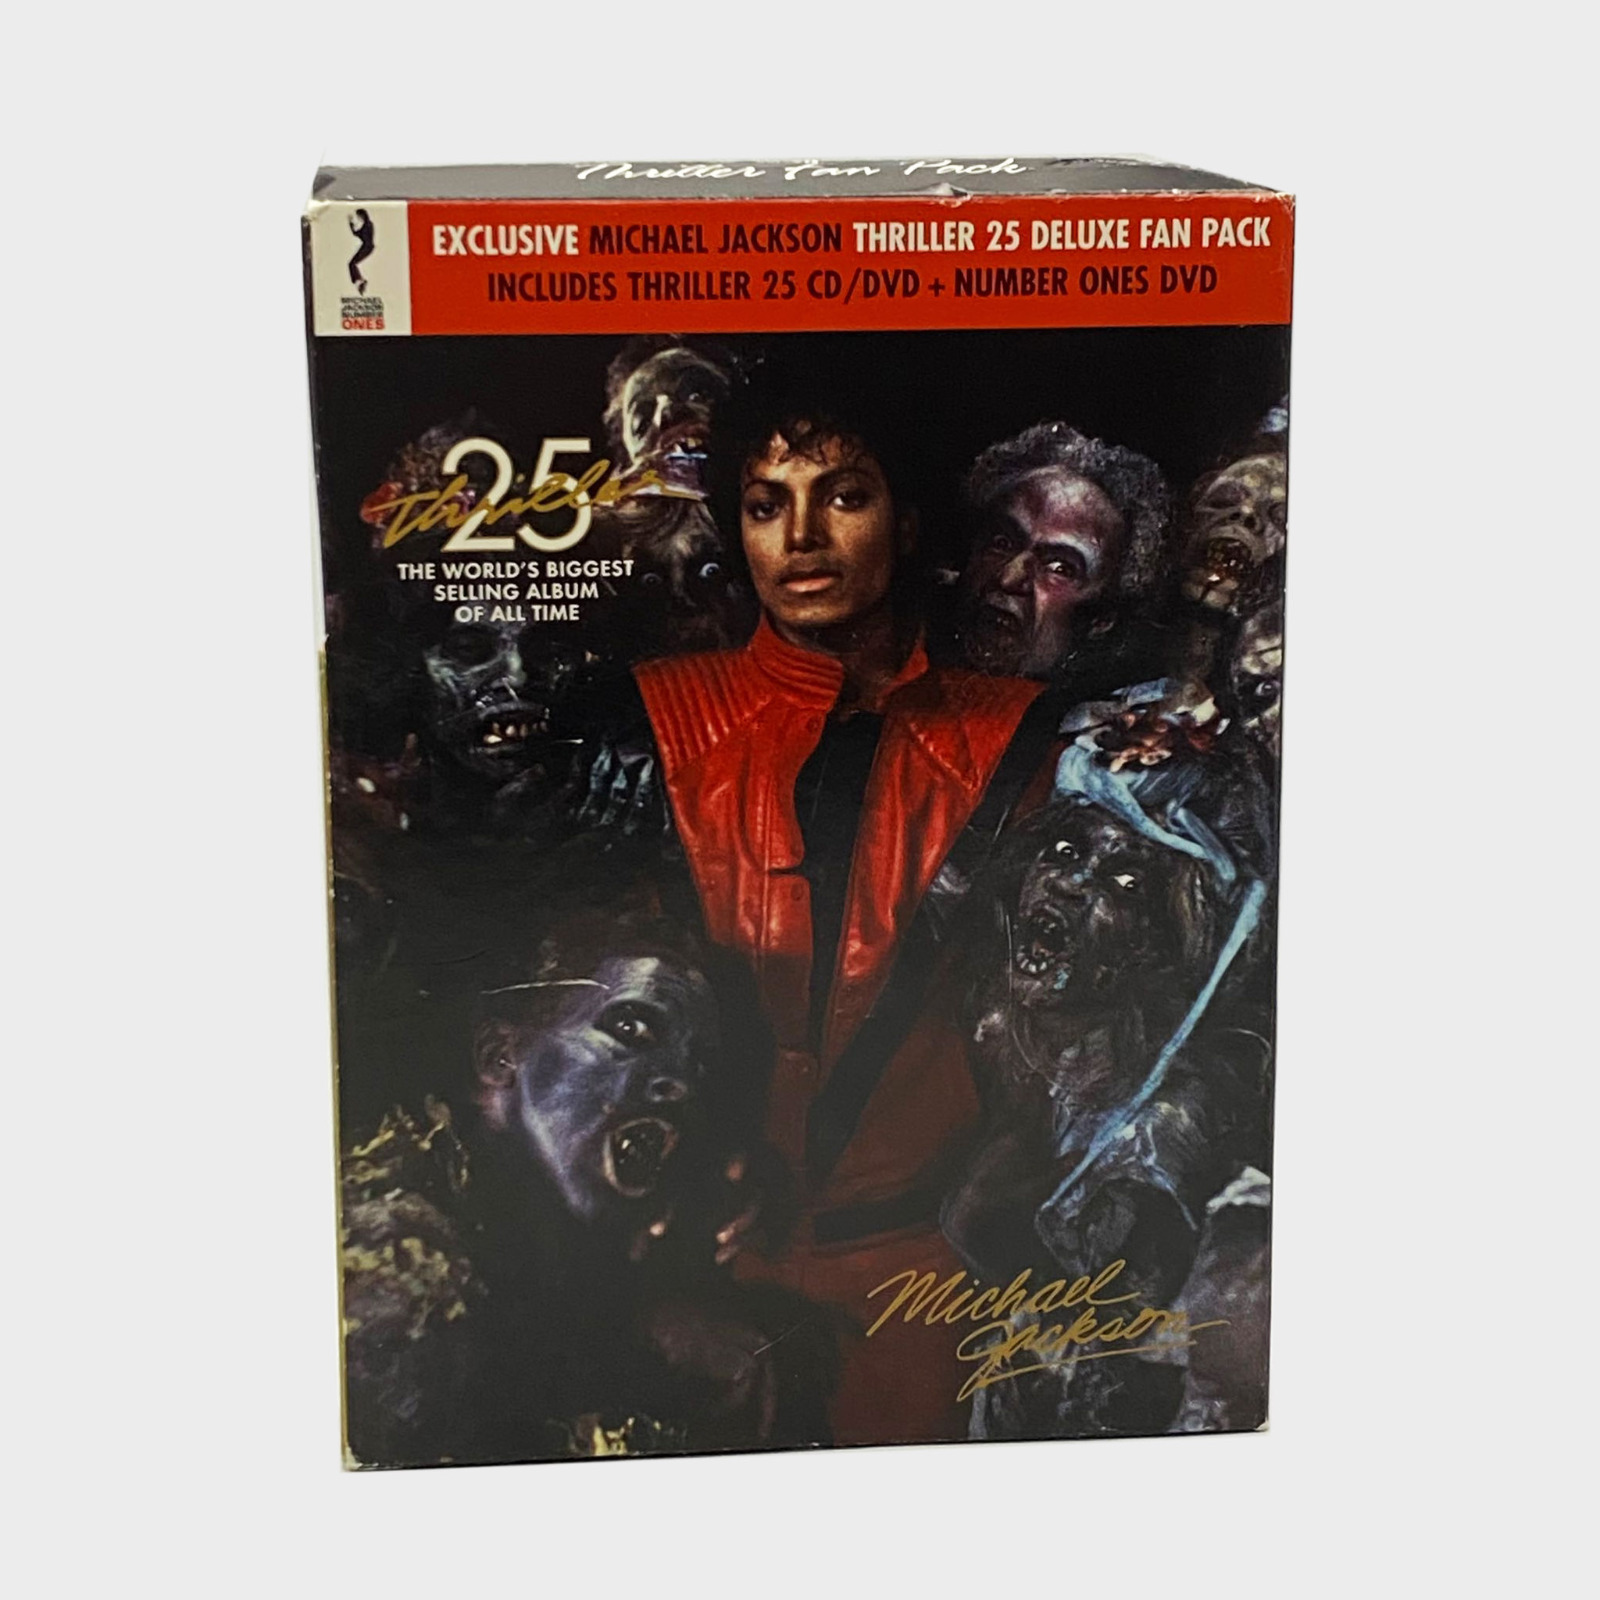  VHS to DVD 7.0 Deluxe